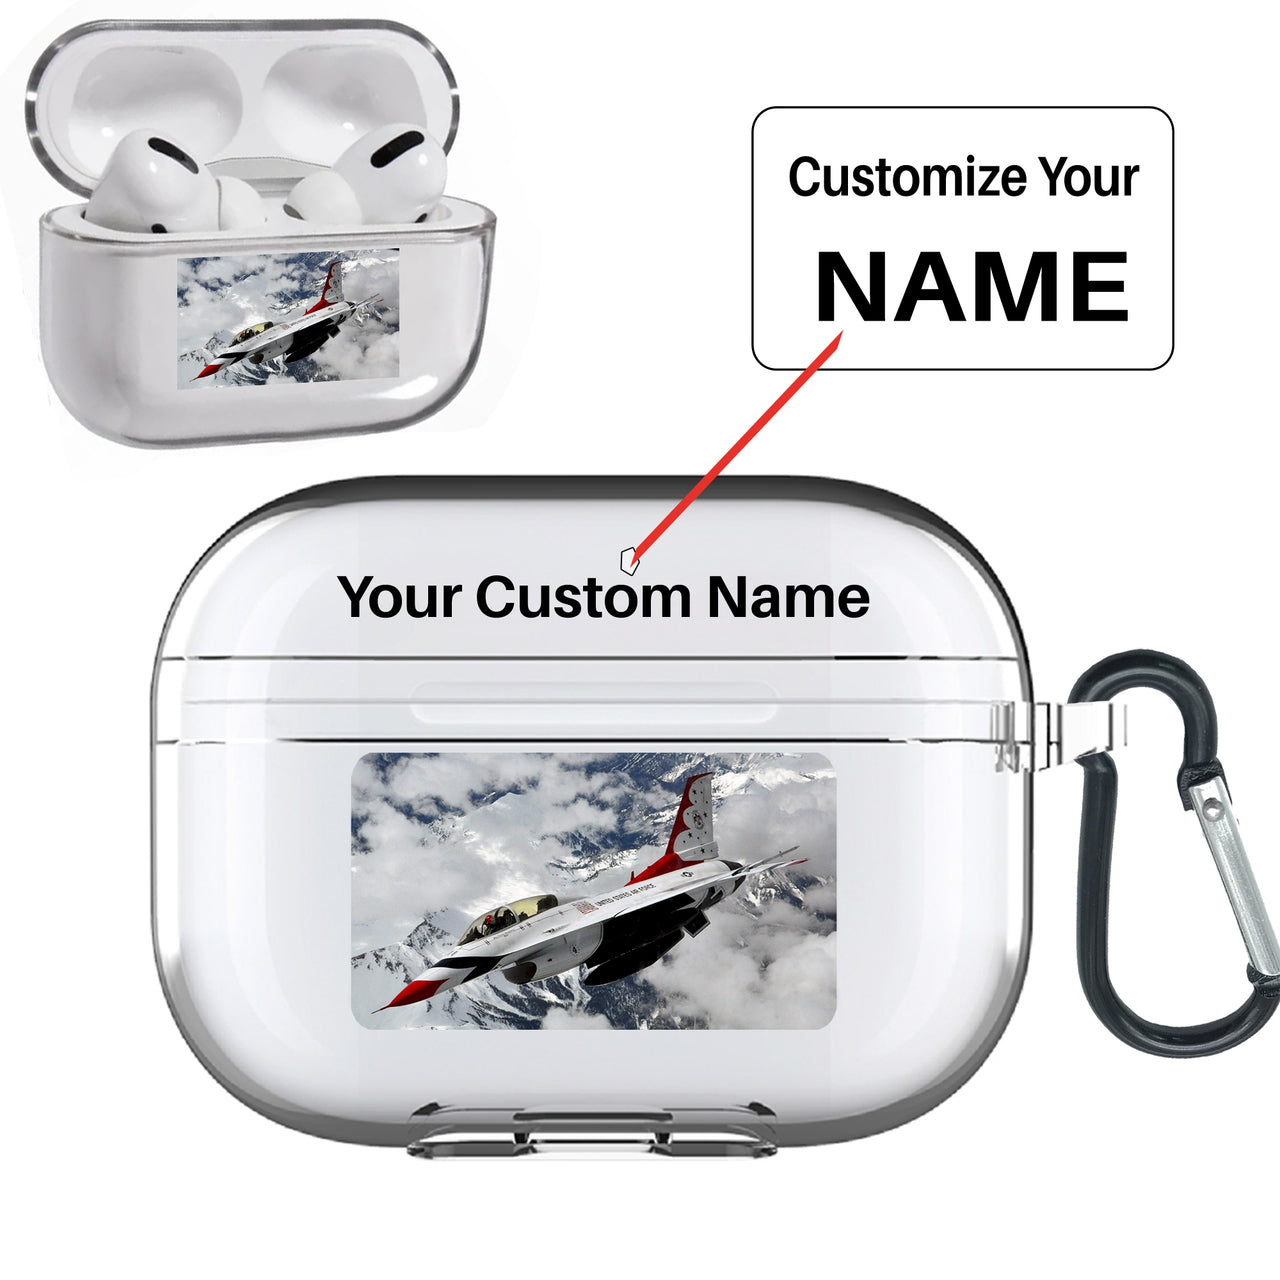 US AirForce Show Fighting Falcon F16 Designed Transparent Earphone AirPods "Pro" Cases